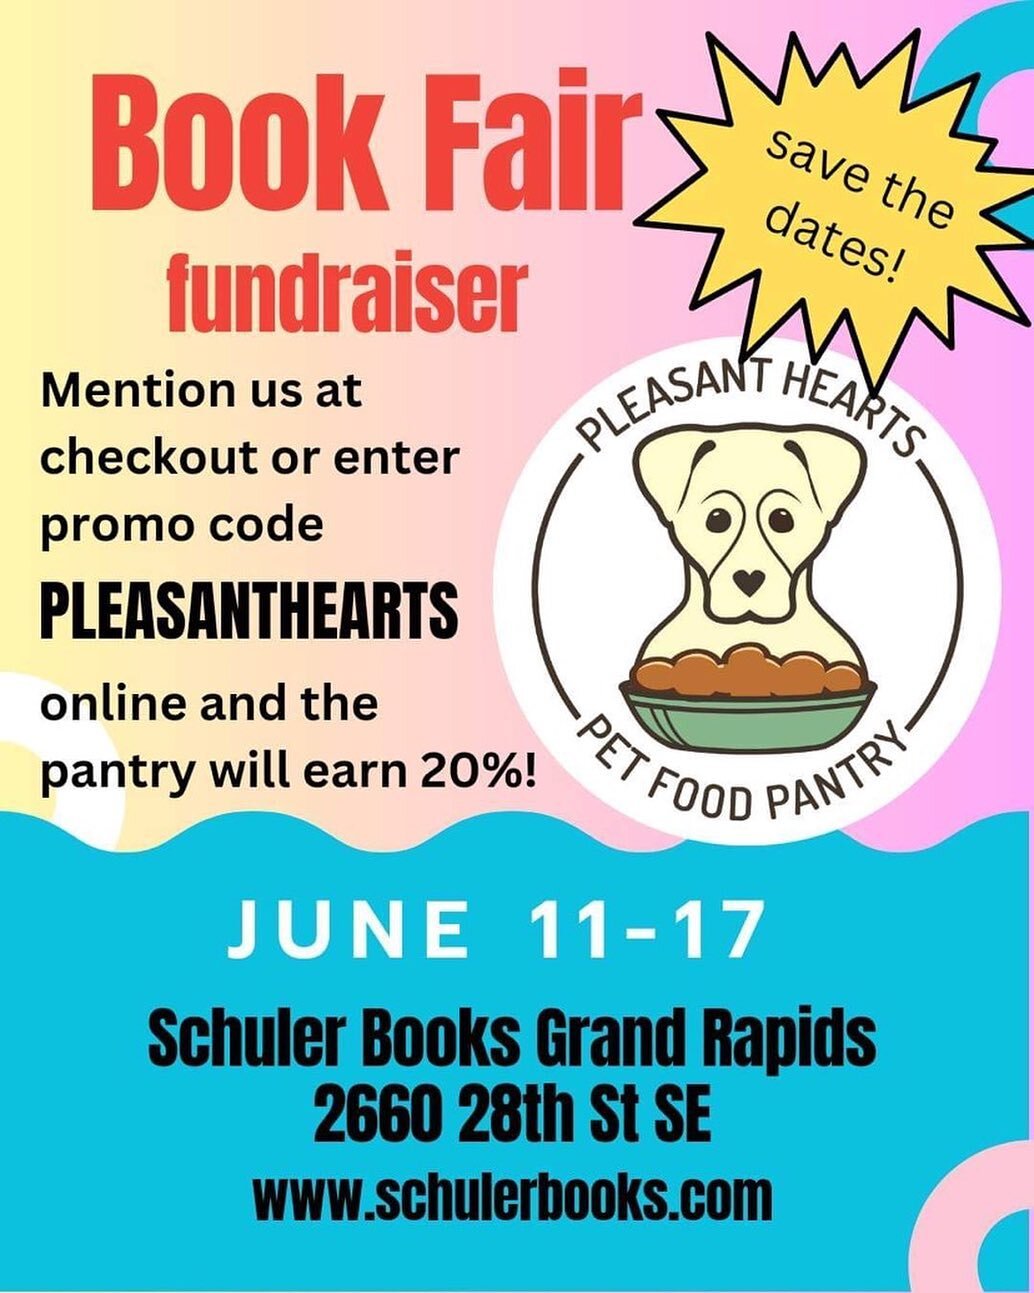 SAVE THE DATES! 

We are very excited to share that we are partnering with @schulerbooks Grand Rapids for a book fair fundraiser!

Need graduation gifts? Father's Day gifts? Need to stock up on books in preparation for all those summer reading progra